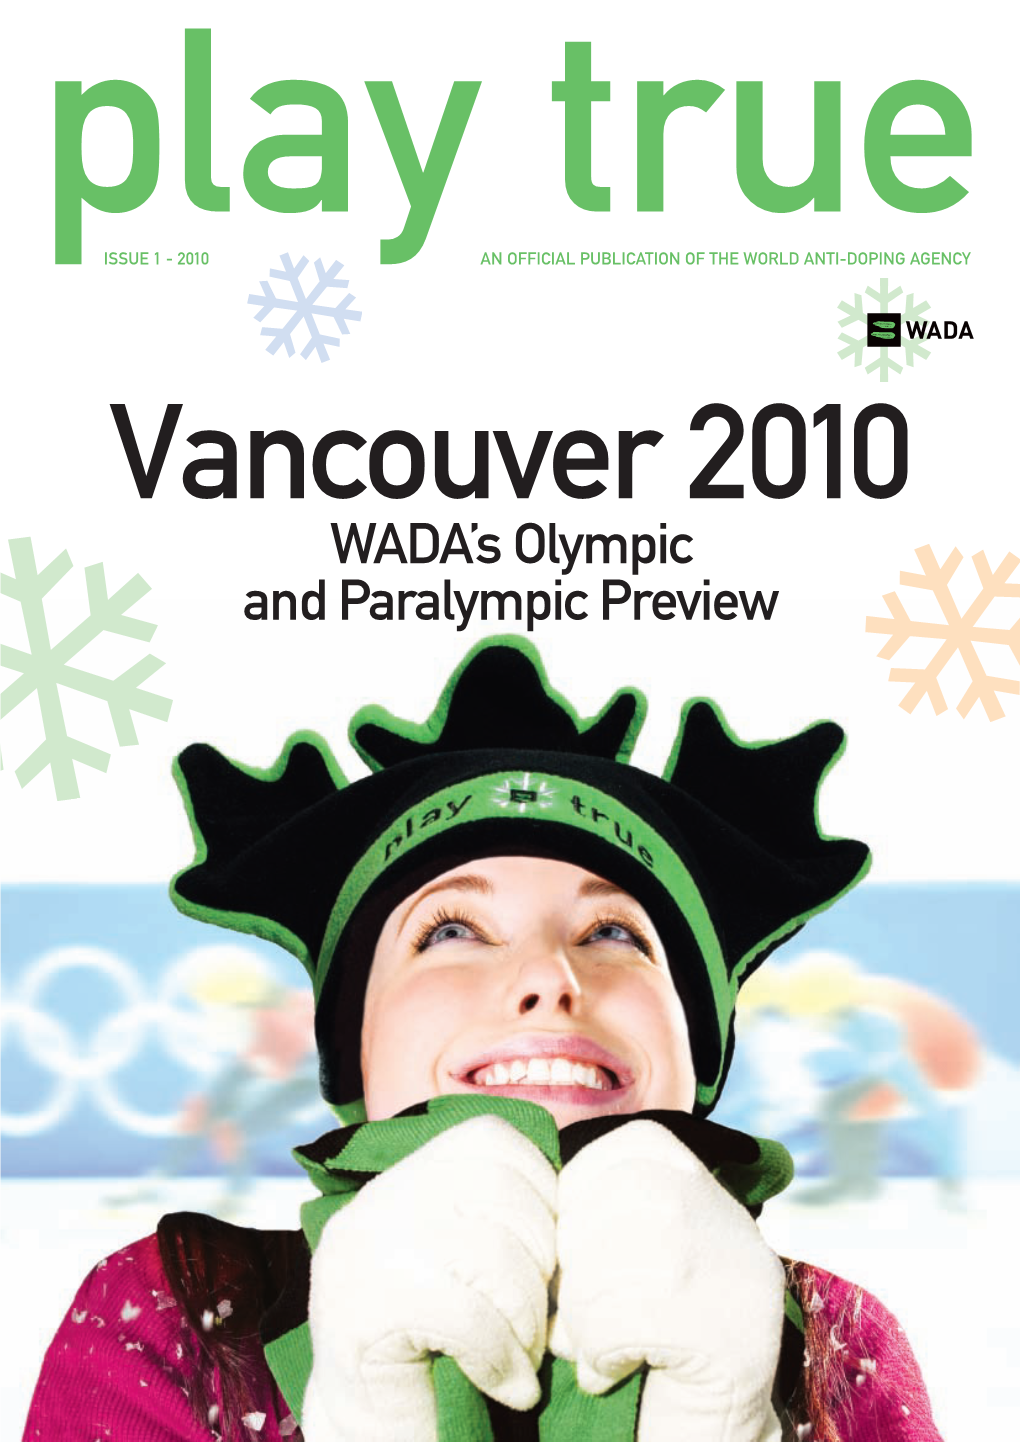 WADA's Olympic and Paralympic Preview